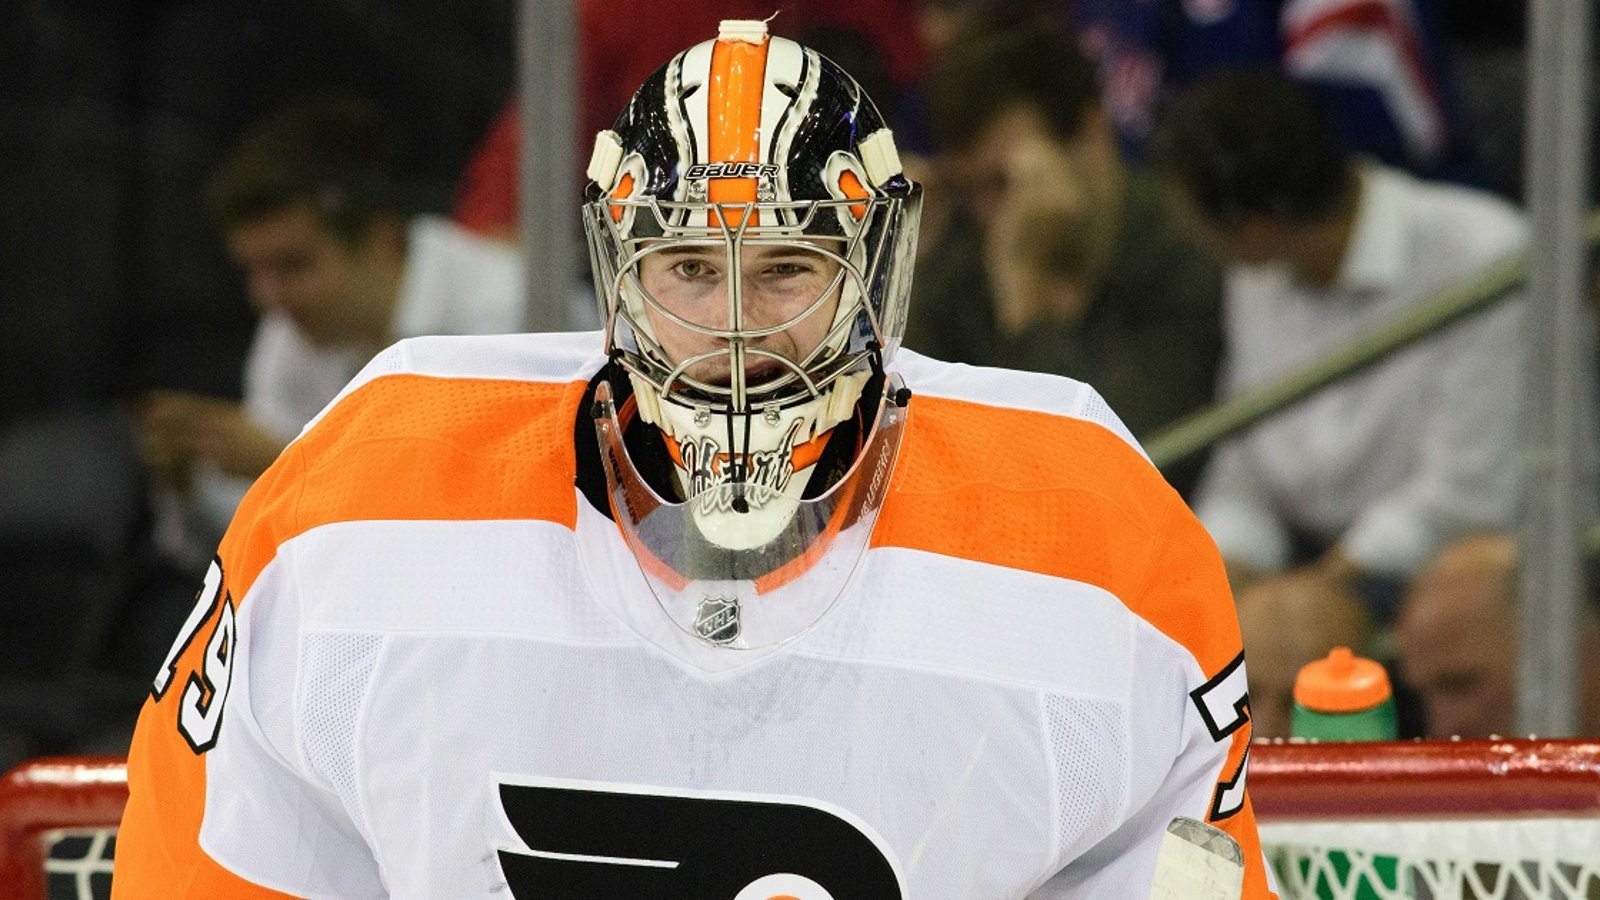 Flyers goalie prospect wants to come to the NHL now.